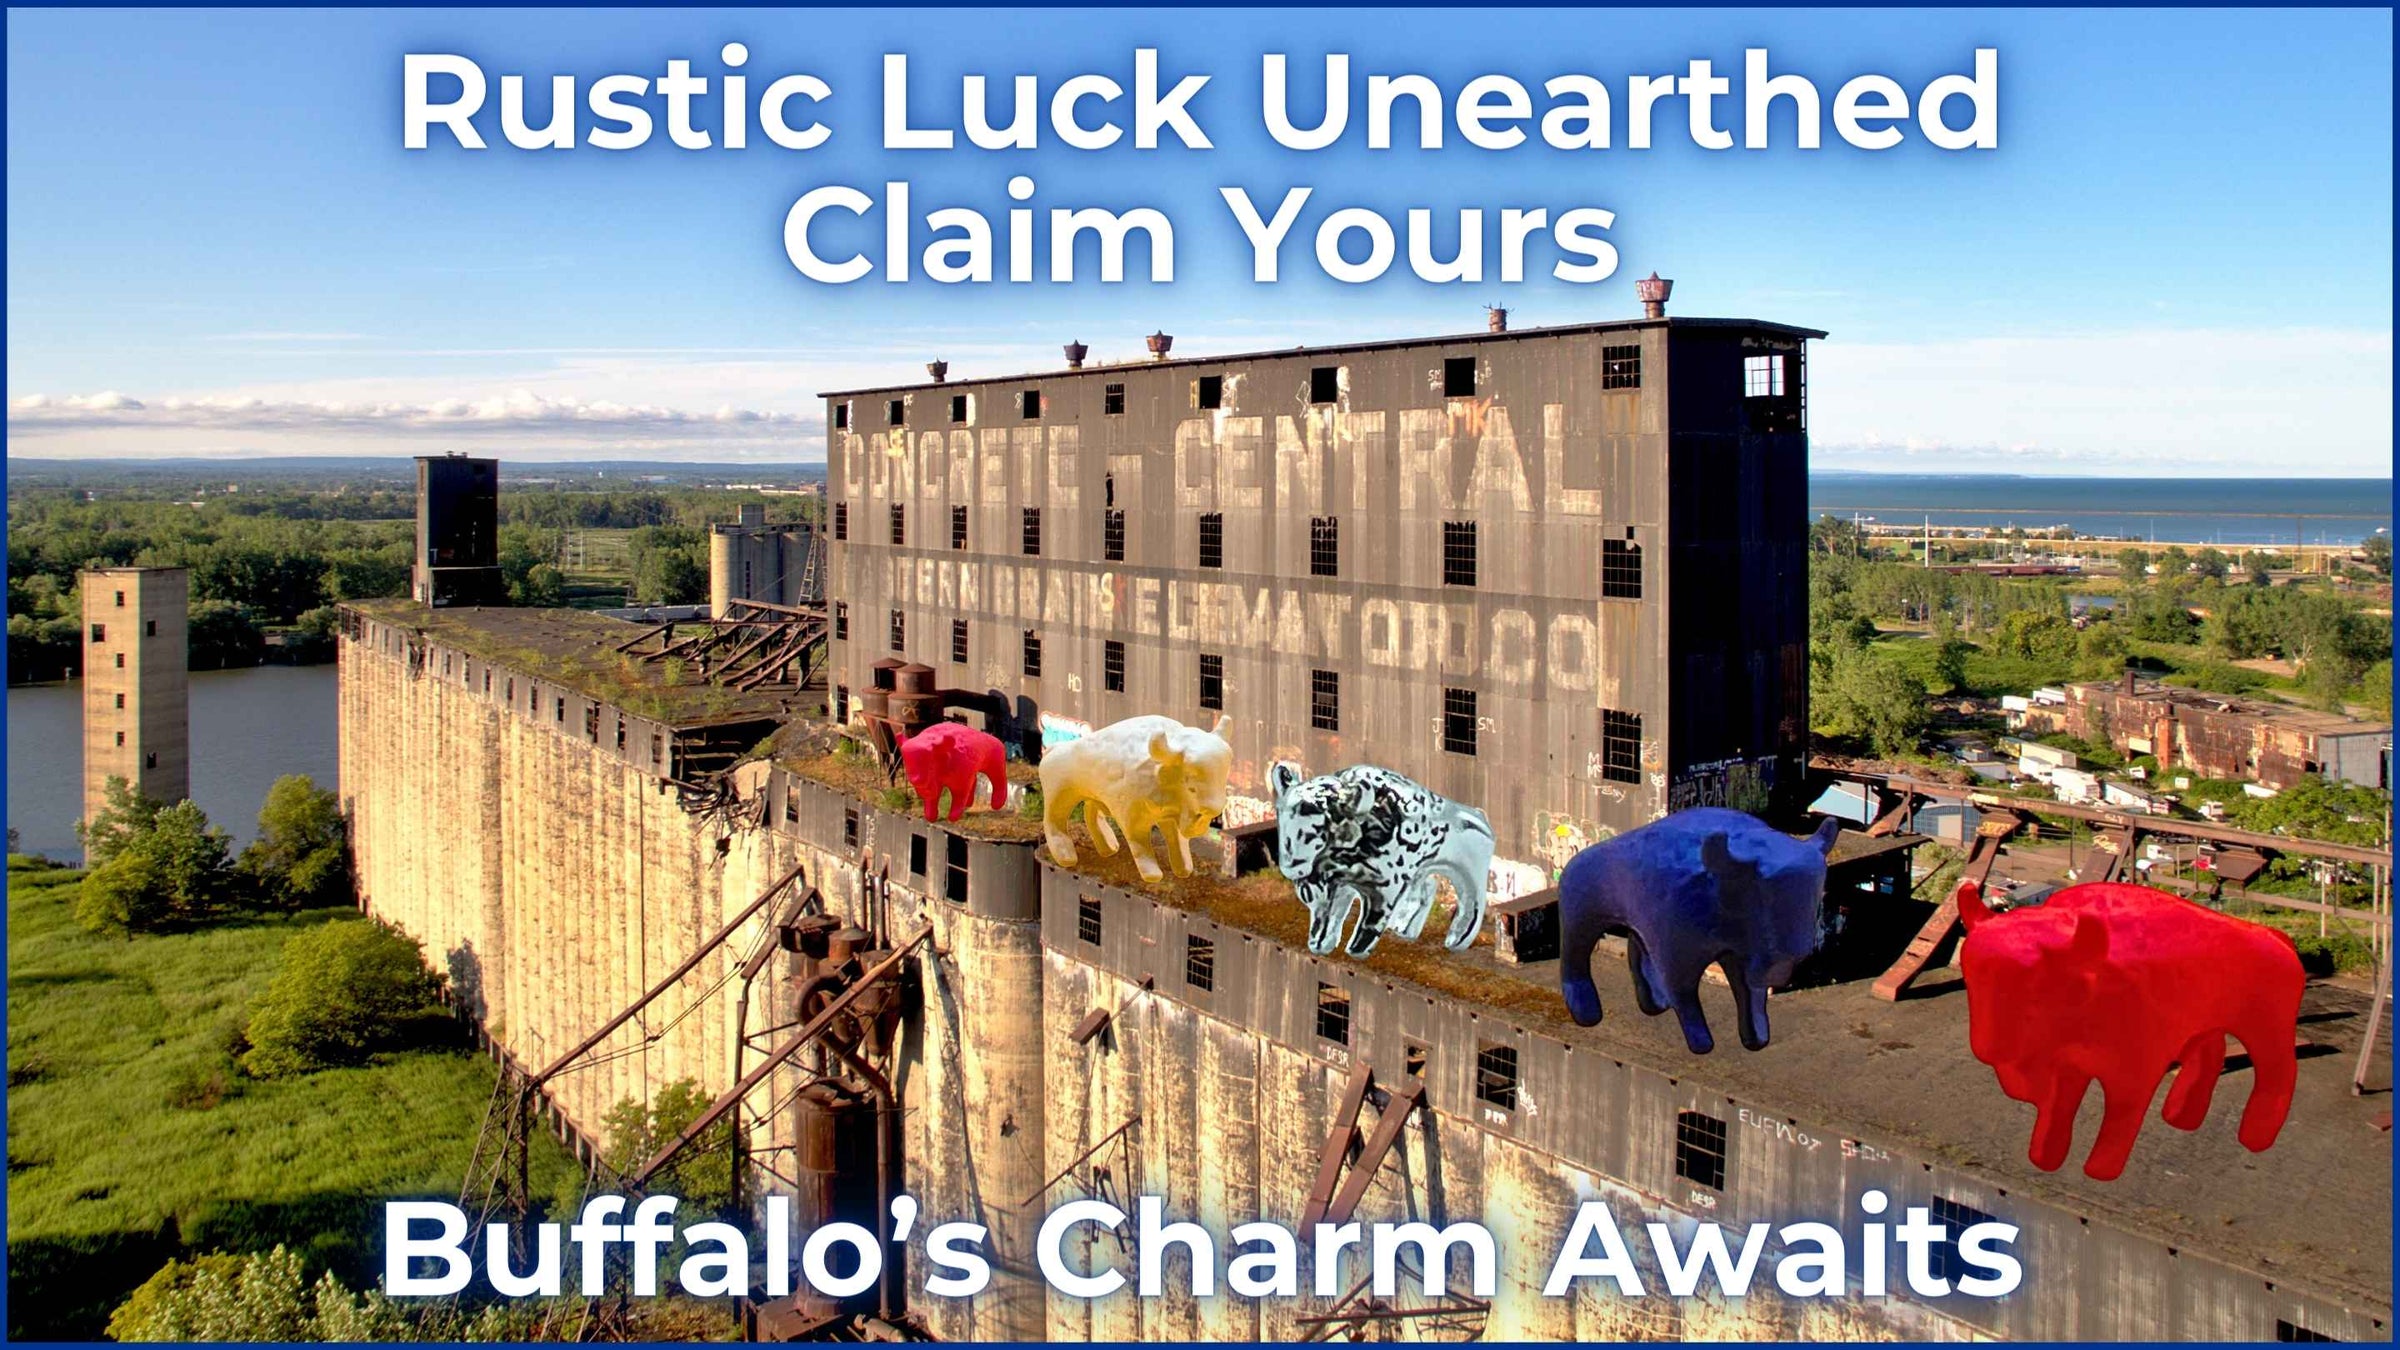 Colorful Lucky Buffalo figurines lined atop the historic grain elevators of Buffalo, symbolizing 'Rustic Luck Unearthed - Claim Yours'. These figures represent Buffalo's charm and the city's storied heritage, awaiting to bring fortune to Bills fans and collectors alike.